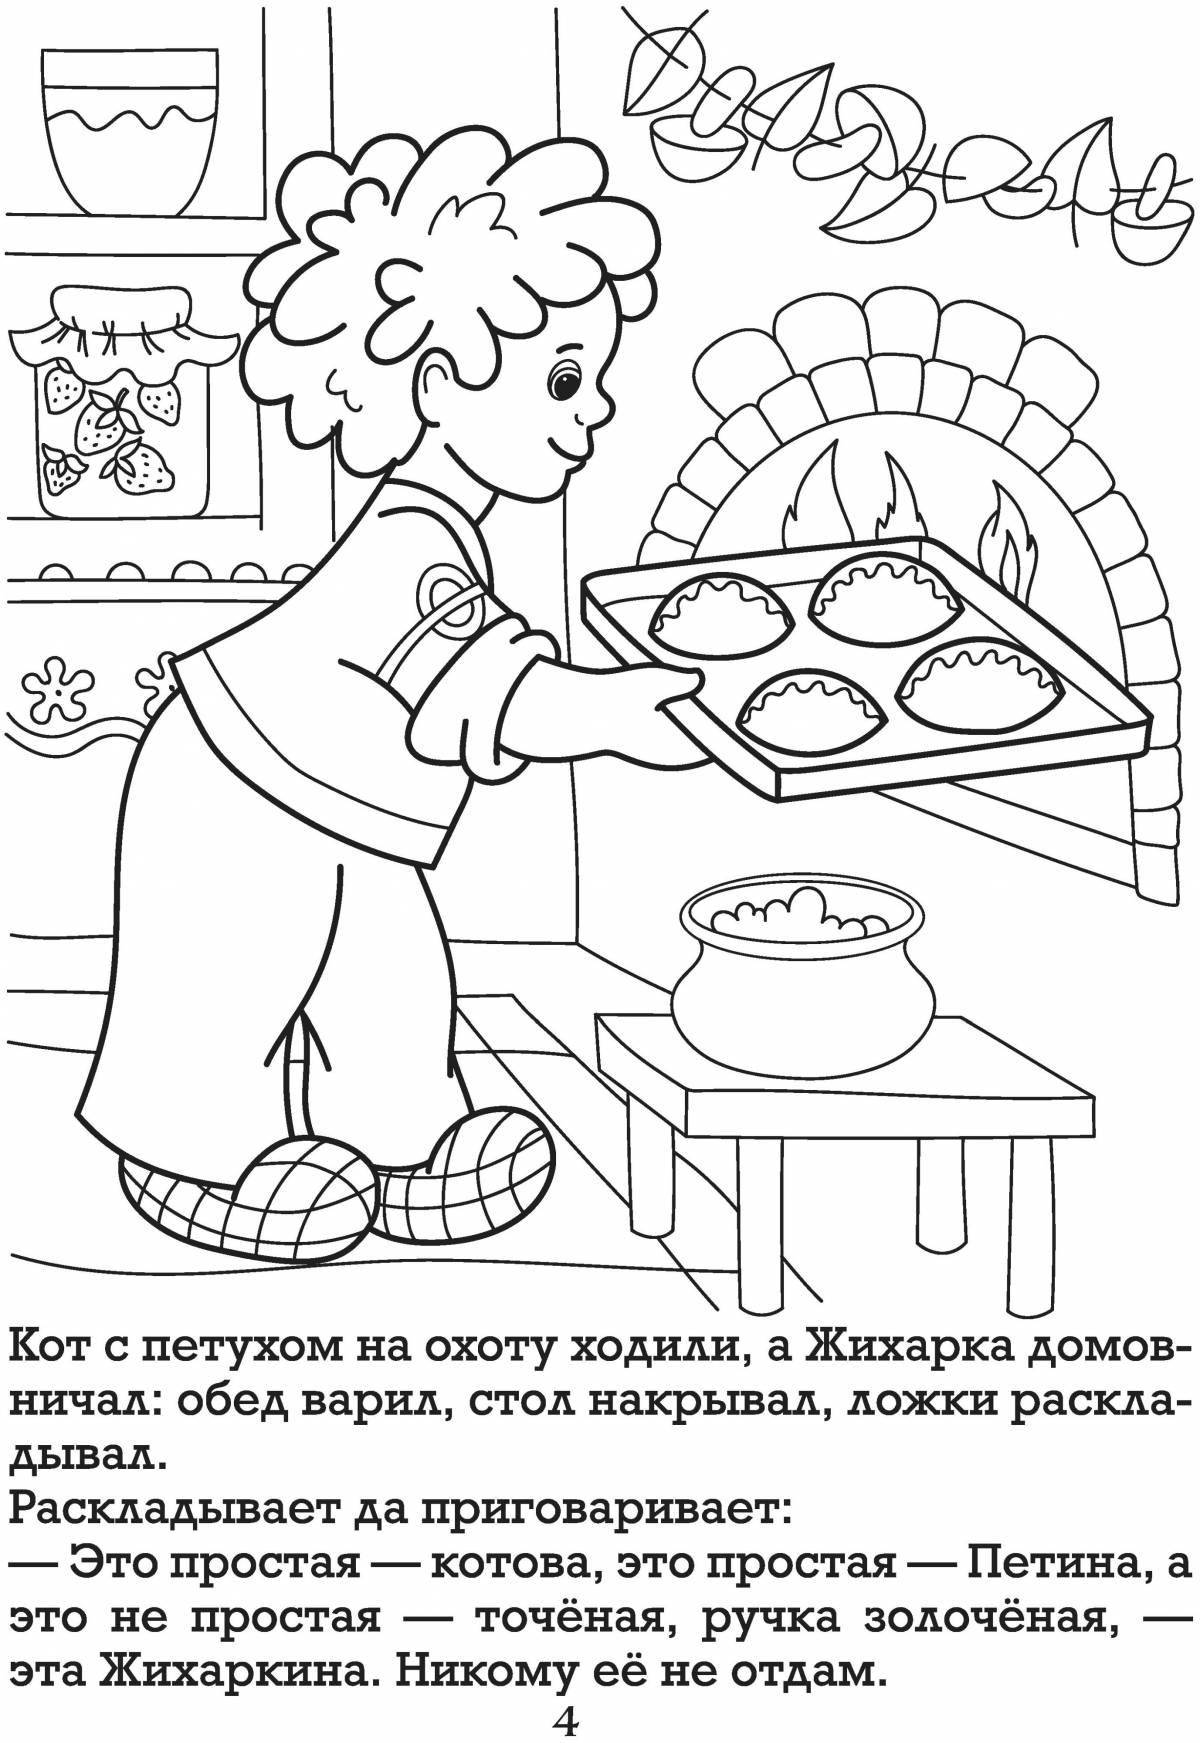 Funny zhigarka coloring book for kids